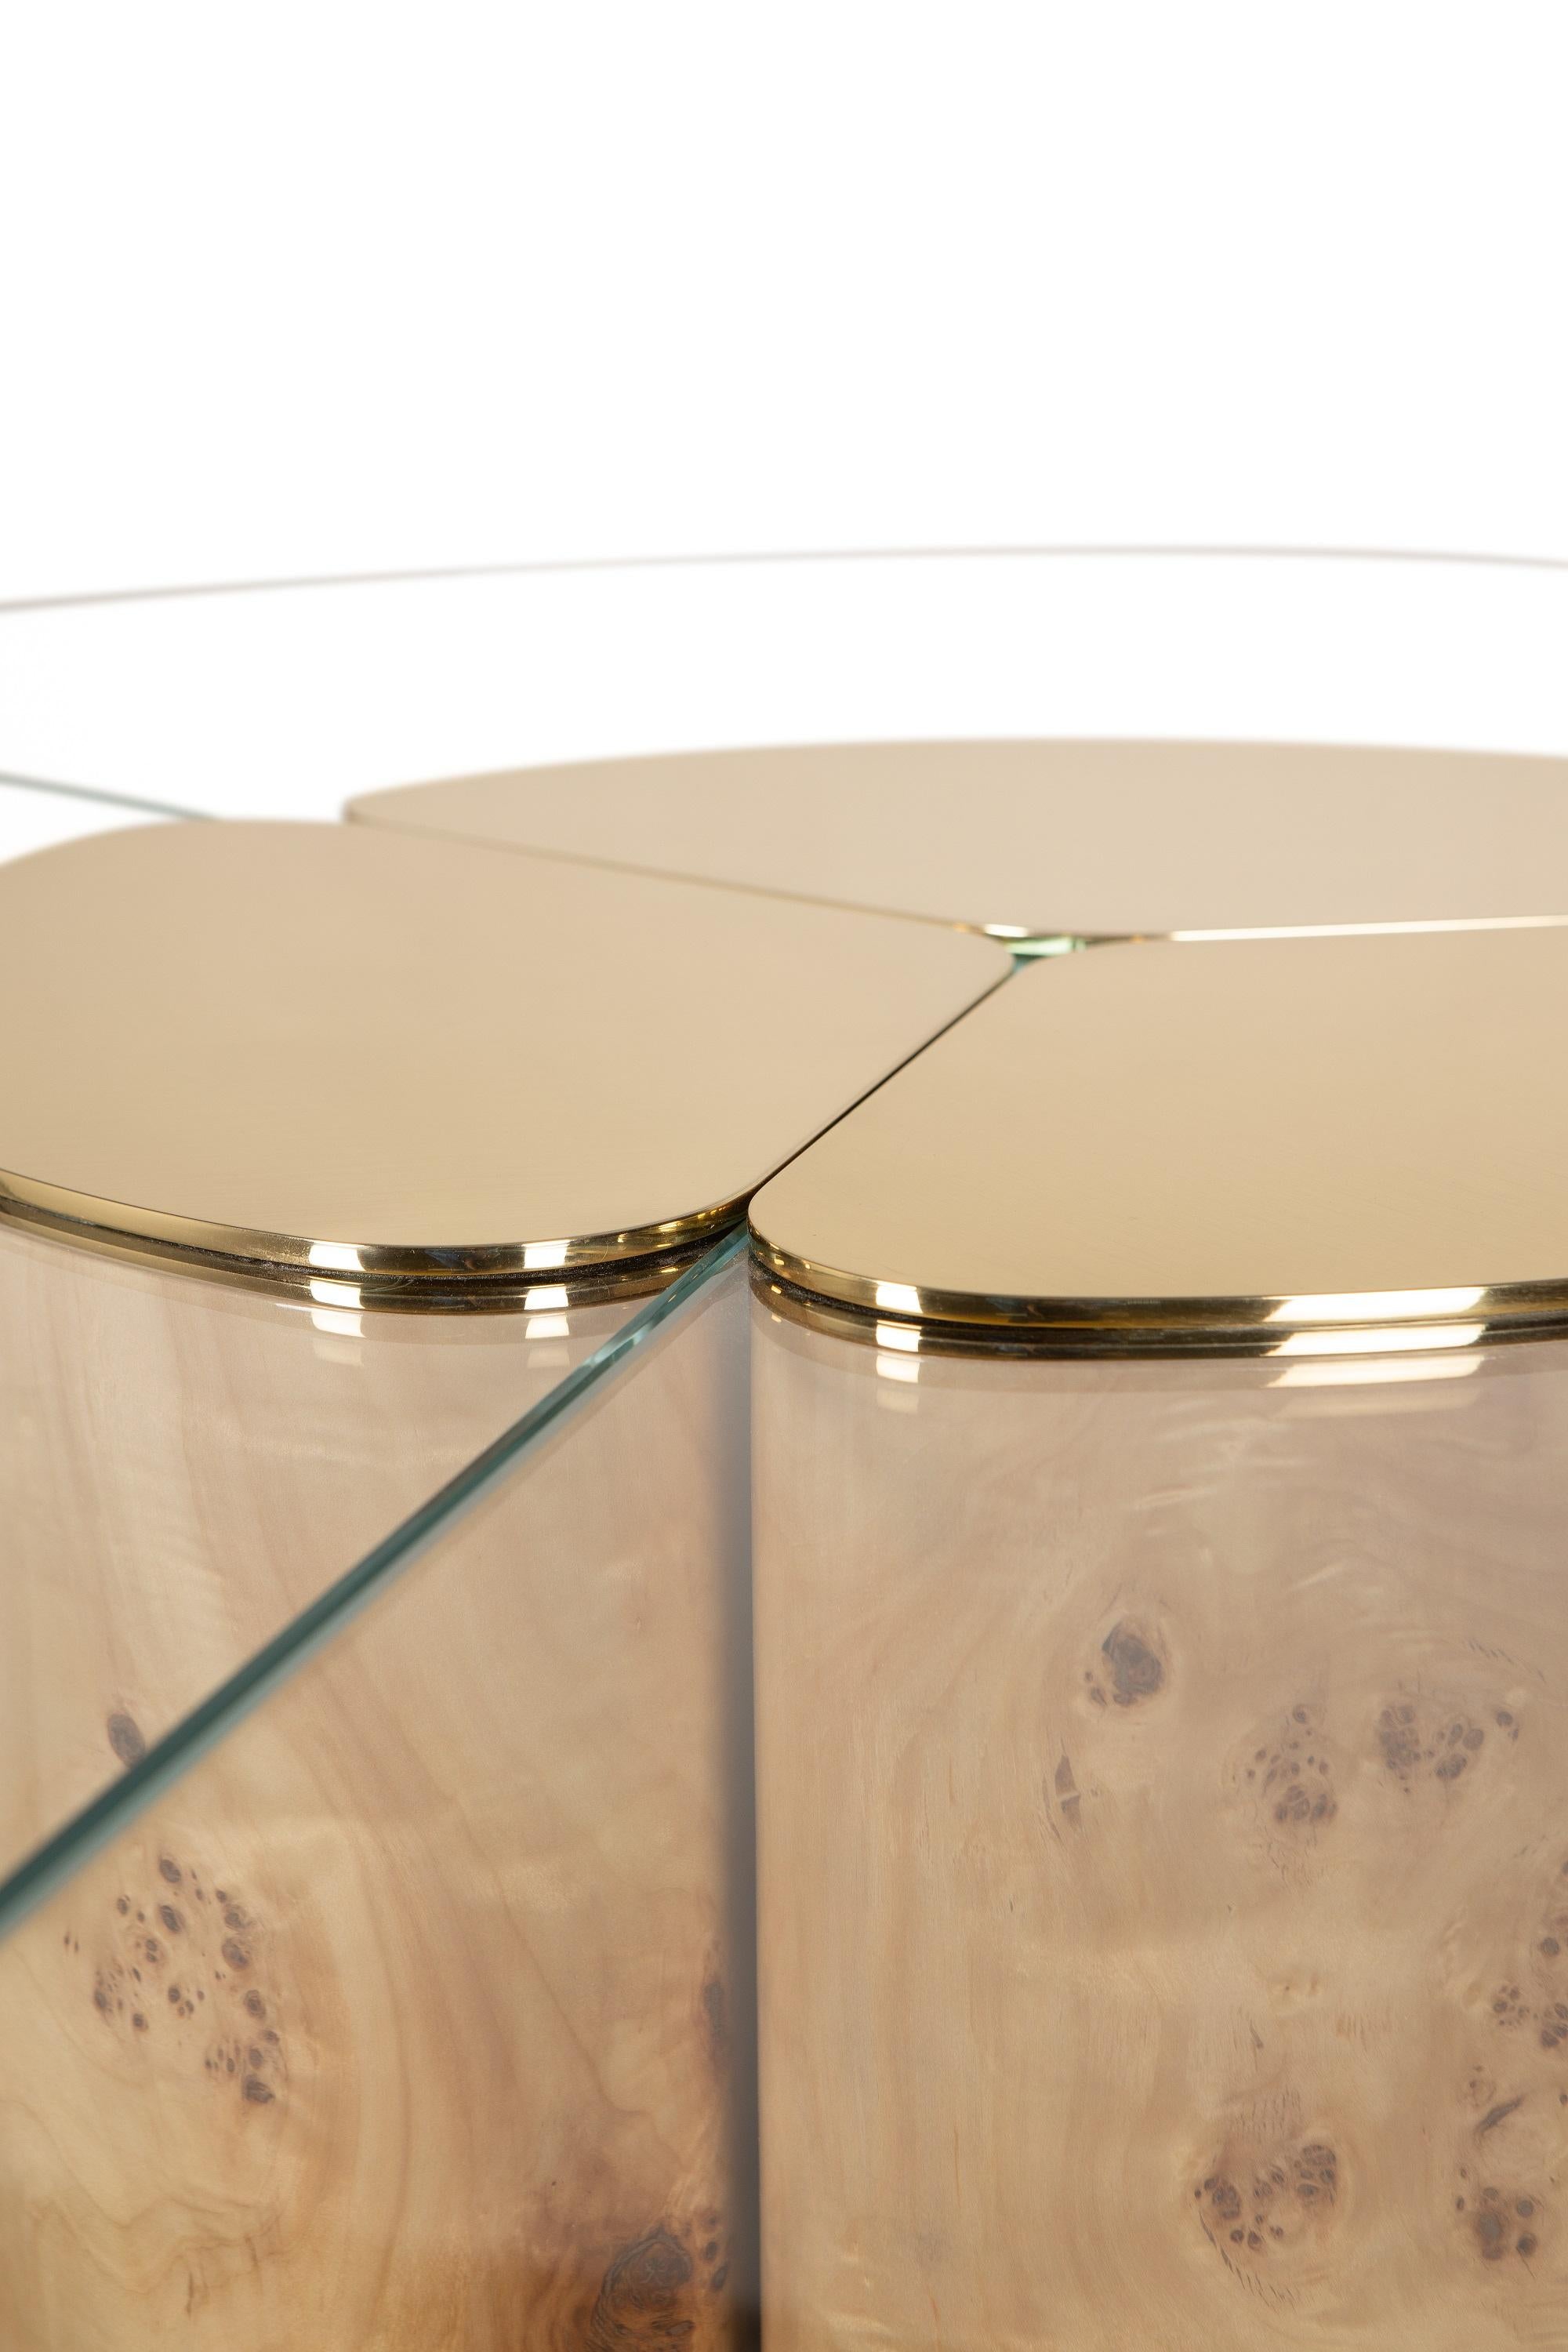 Euphoria Dining Table by Memoir Essence
Dimensions: D 140 x W 140 x H 76 cm.
Materials: Polished brass, lacquer and glass.

Also available in brushed brass. Please contact us. 

Memoir presents the new dining table Euphoria I. Dynamic, and classy,